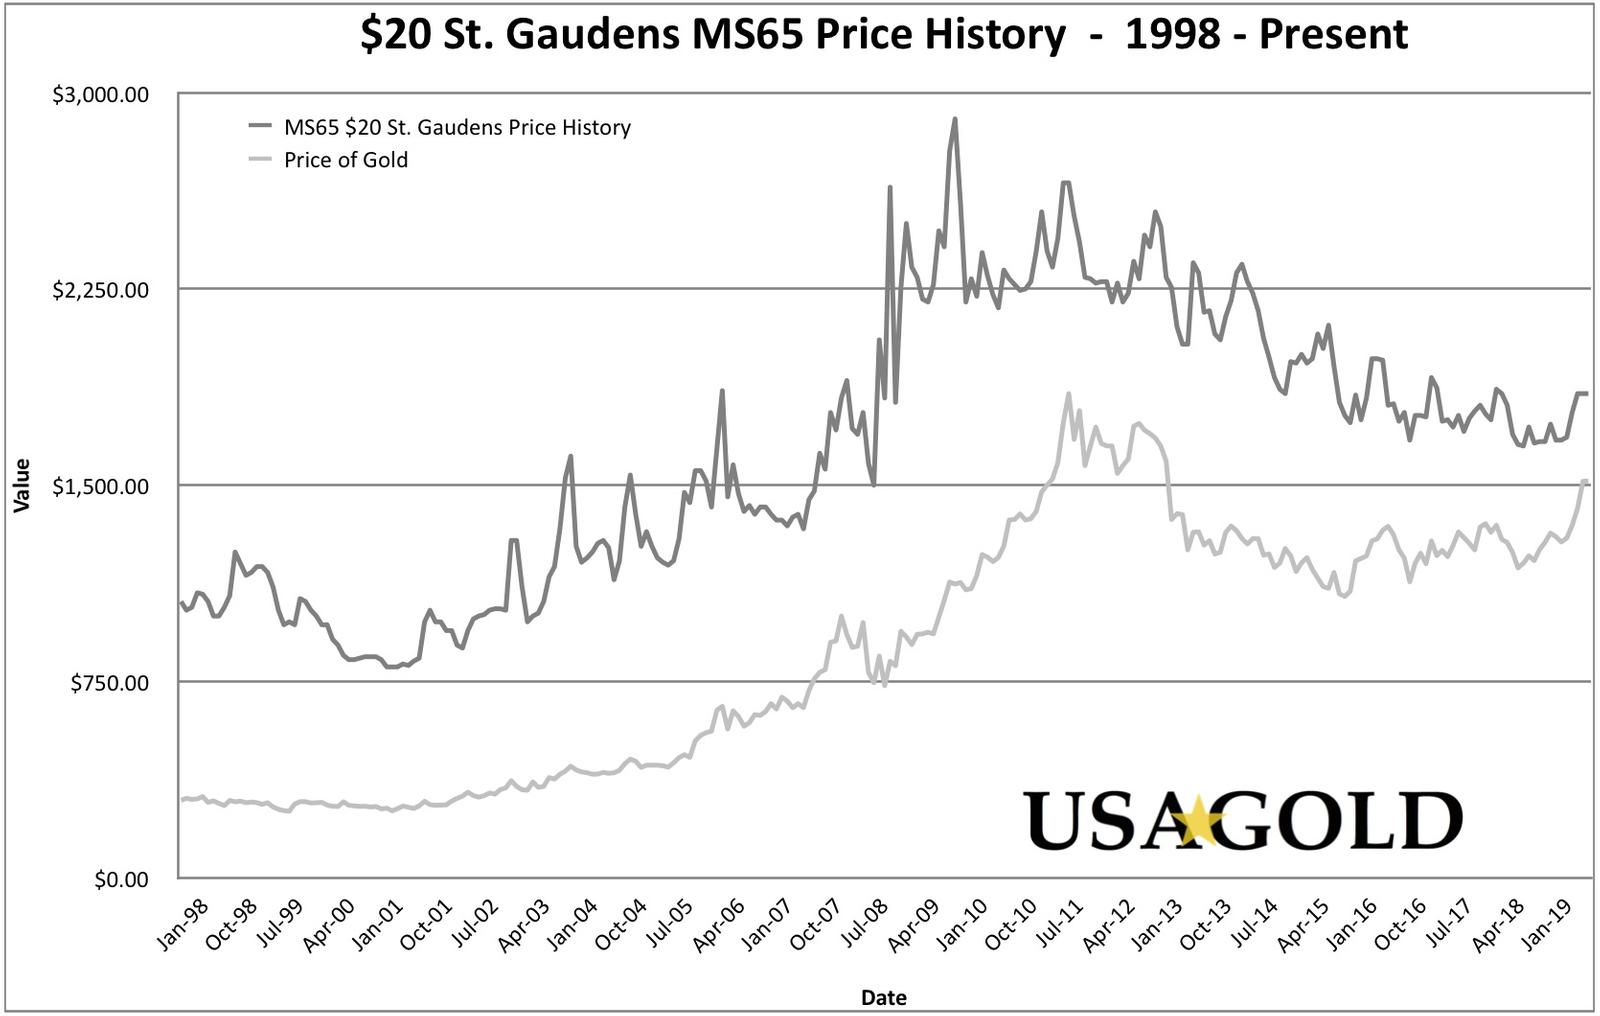 Line chart showing price history of $20 St Gaudens MS 65